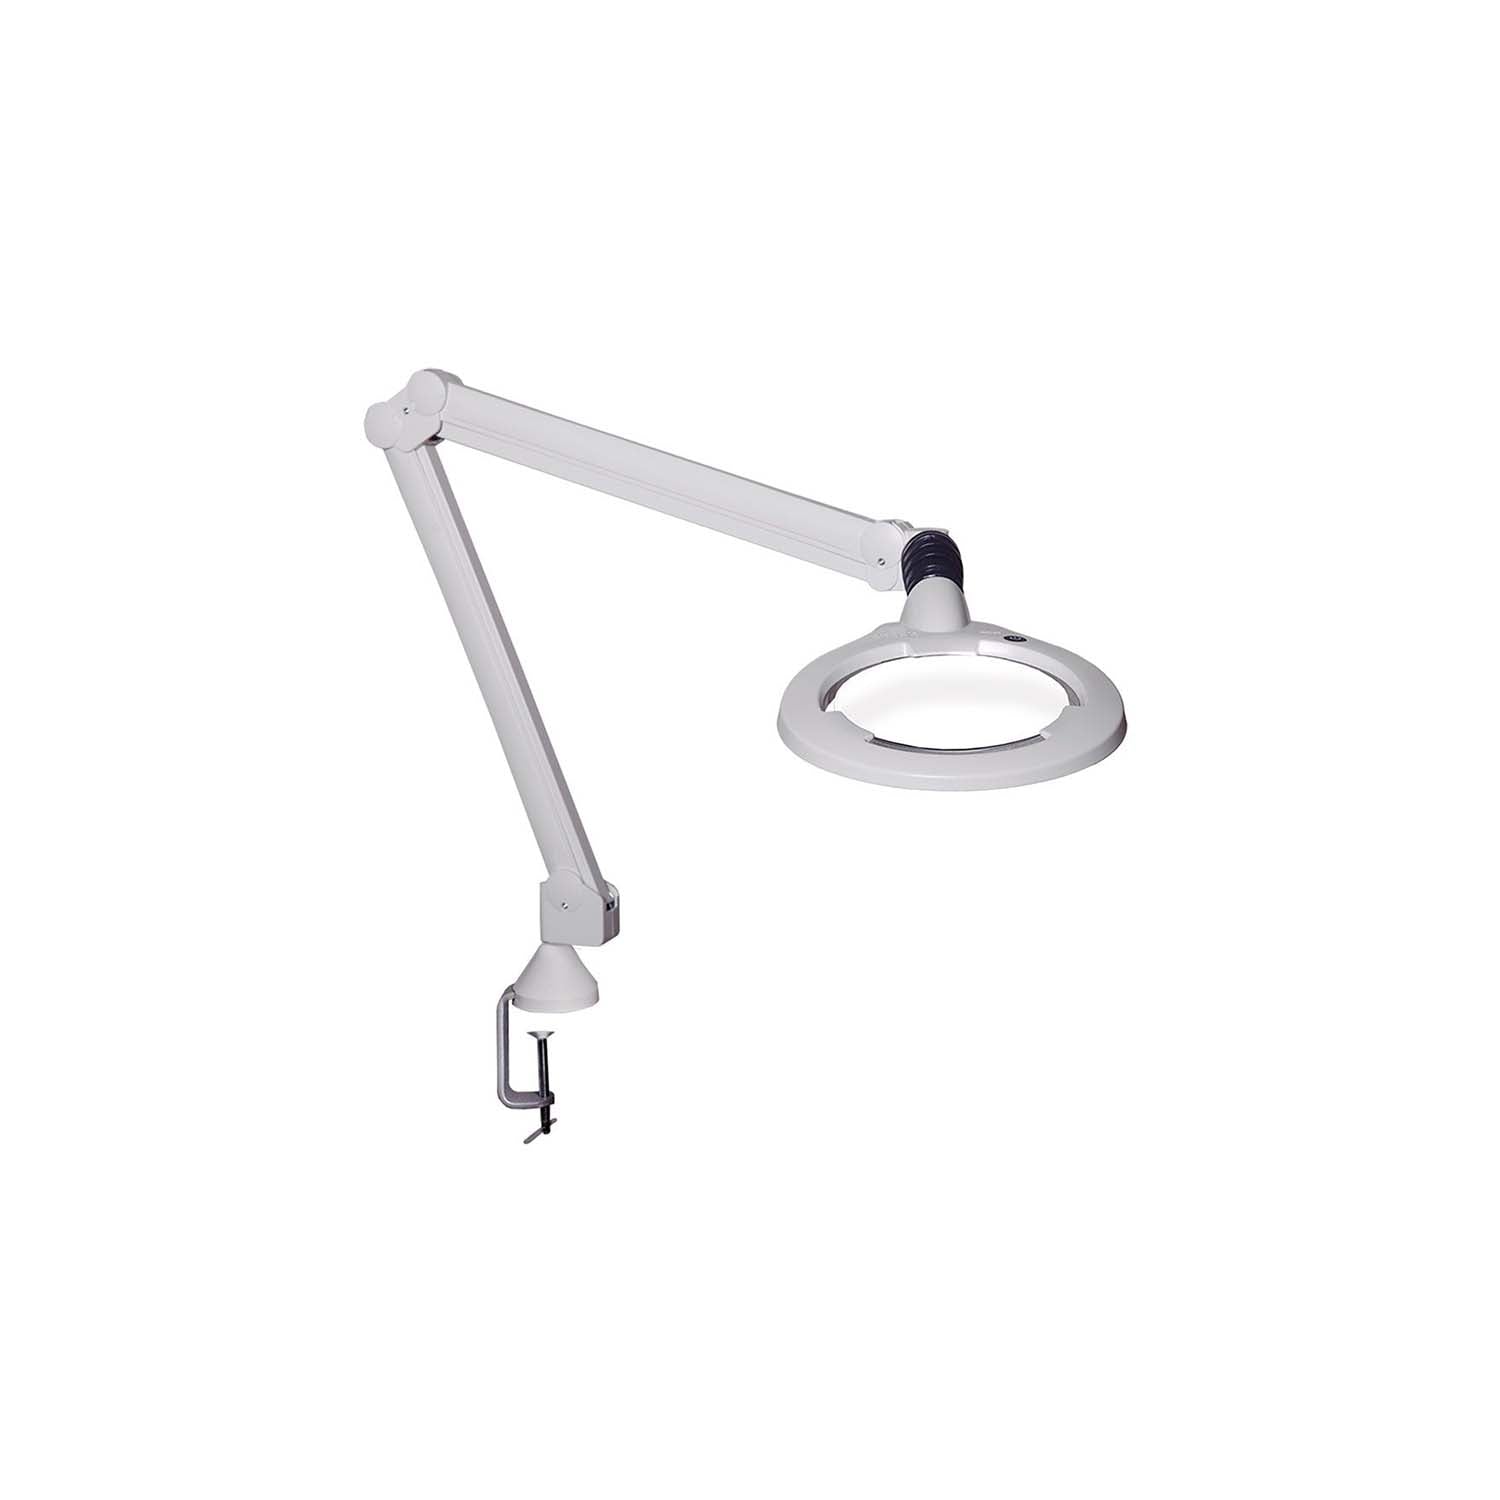 Circus LED Medical Illuminated Magnifier (Dimmable) | 3.5d